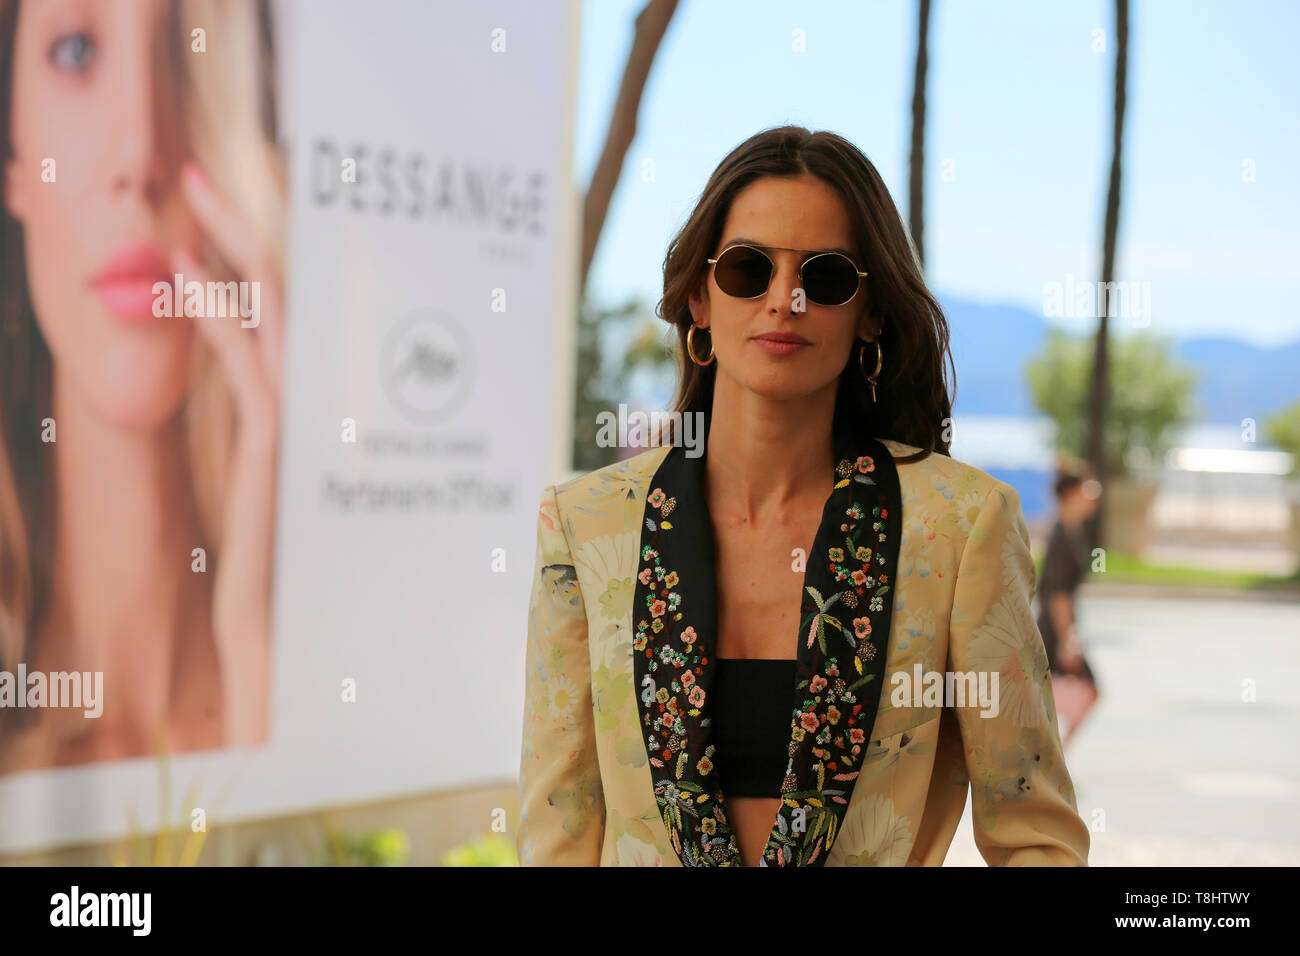 Cannes, France - 13th May, 2019:Brazilian supermodel Izabel Goulart attends the official jury dinner of the 72nd Cannes Film Festival at the Martinez Hotel (Credit: Mickael Chavet/Project Daybreak/Alamy Live News) Stock Photo